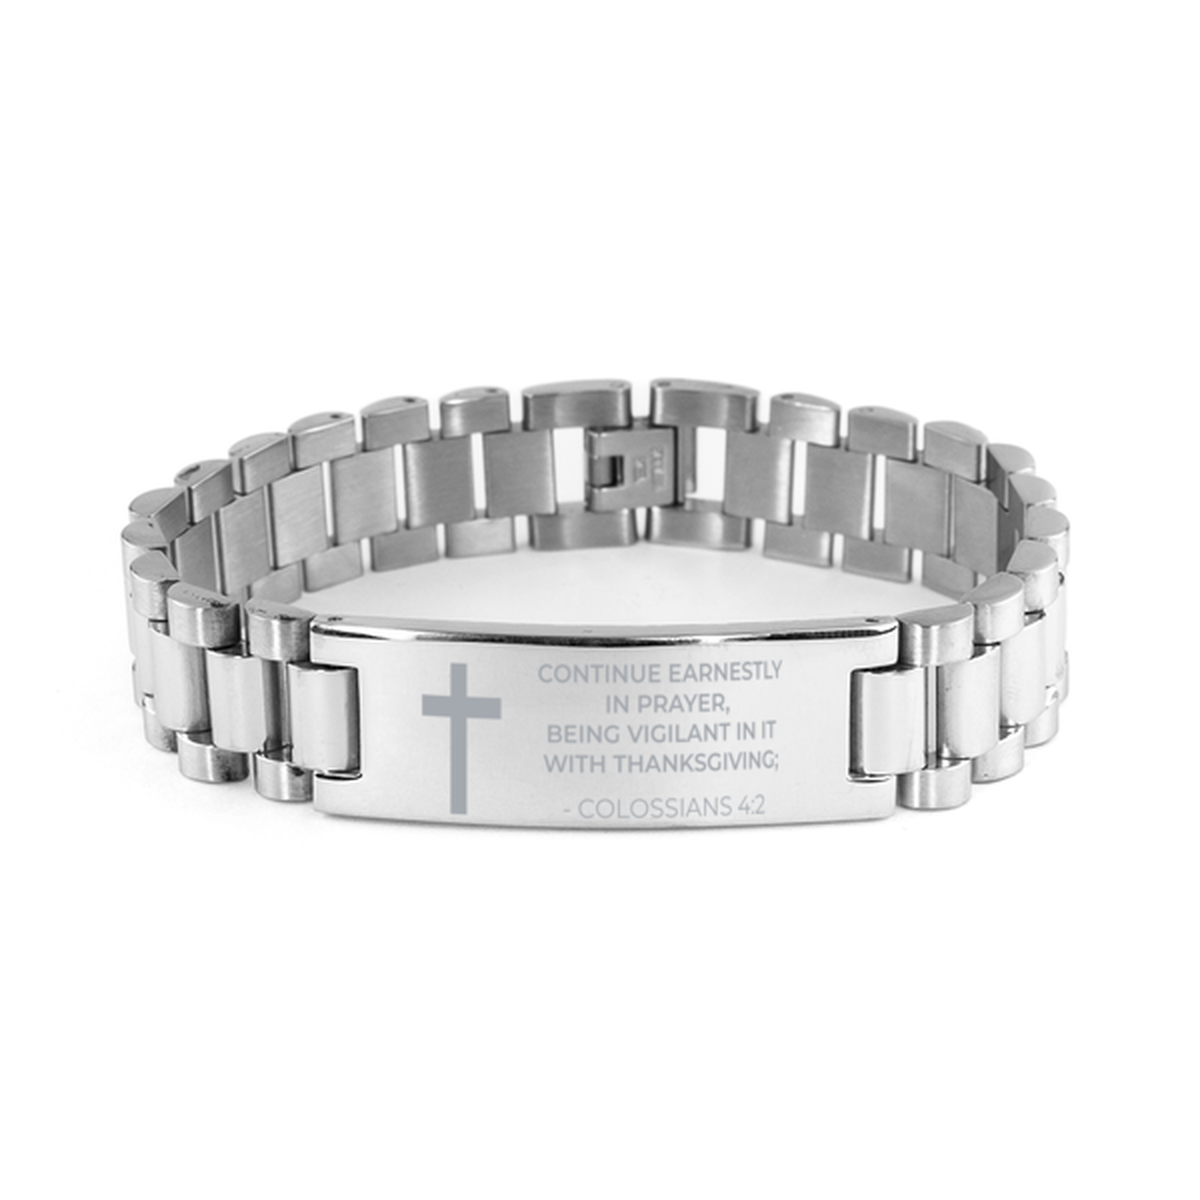 Christian Ladder Stainless Steel Bracelet, Colossians 4:2 Continue Earnestly In Prayer, Being Vigilant In, Motivational Bible Verse Gifts For Men Women